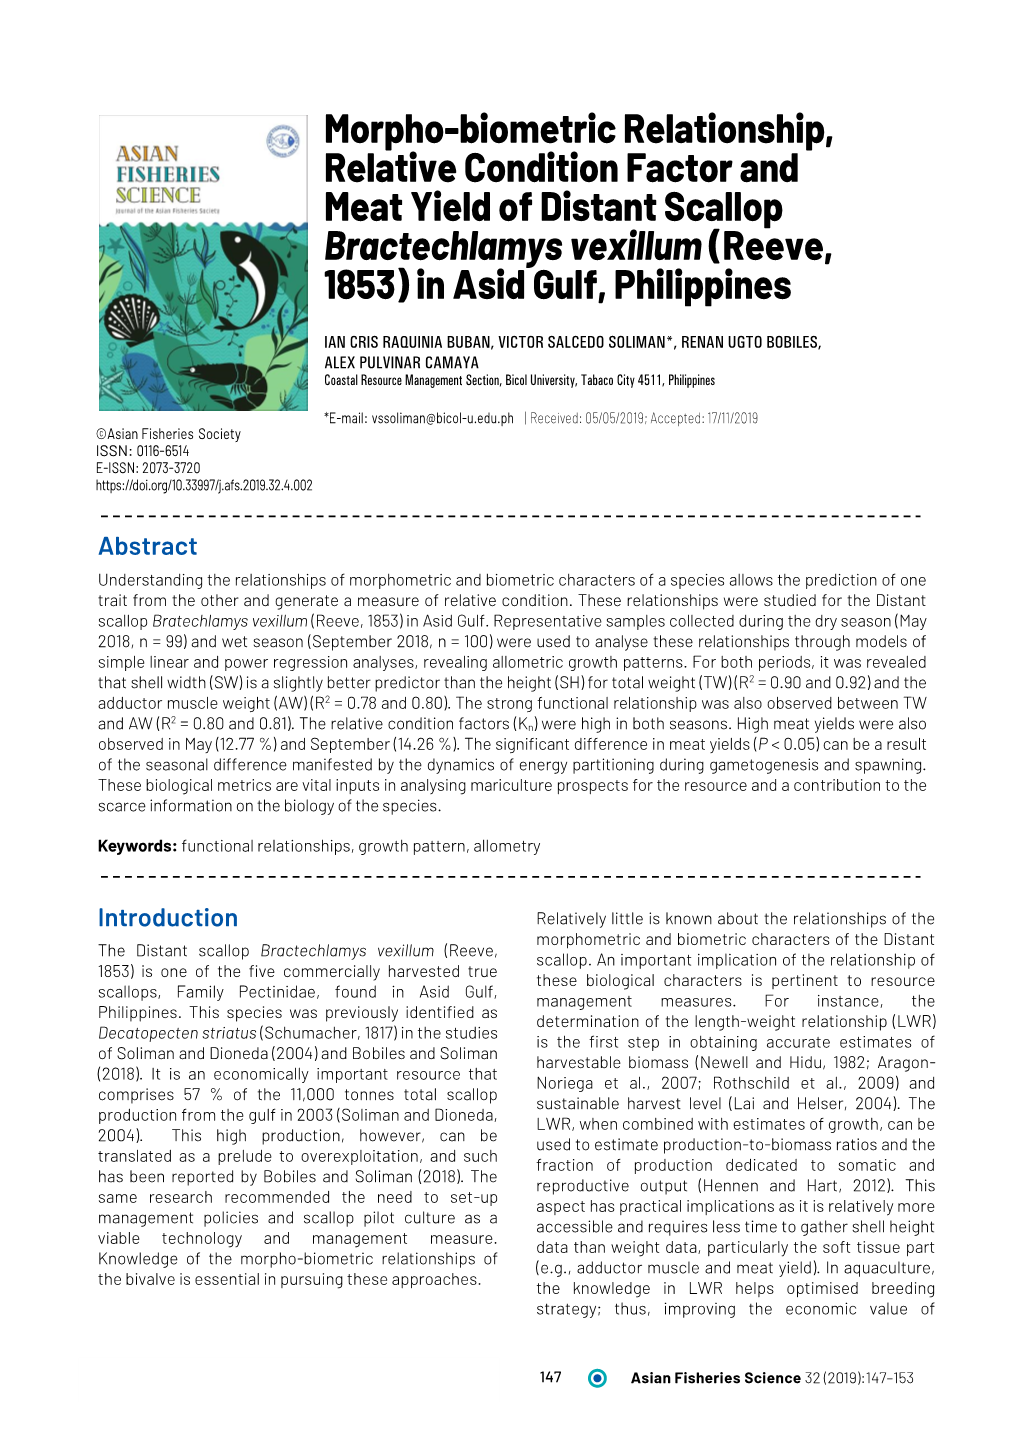 Morpho-Biometric Relationship, Relative Condition Factor and Meat Yield of Distant Scallop Bractechlamys Vexillum (Reeve, 1853) in Asid Gulf, Philippines